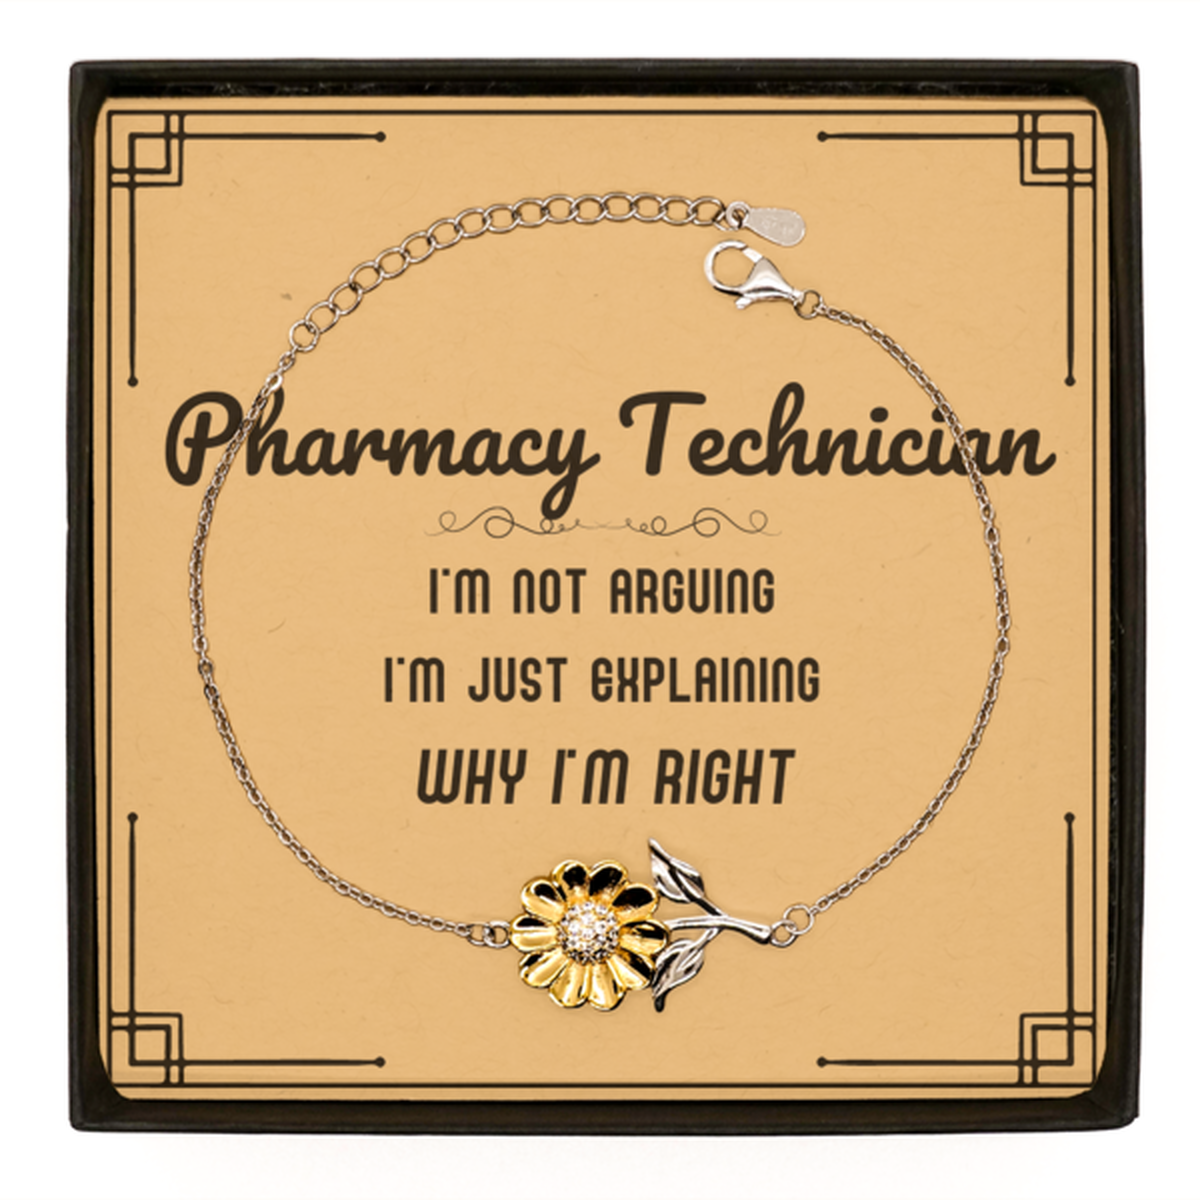 Pharmacy Technician I'm not Arguing. I'm Just Explaining Why I'm RIGHT Sunflower Bracelet, Funny Saying Quote Pharmacy Technician Gifts For Pharmacy Technician Message Card Graduation Birthday Christmas Gifts for Men Women Coworker